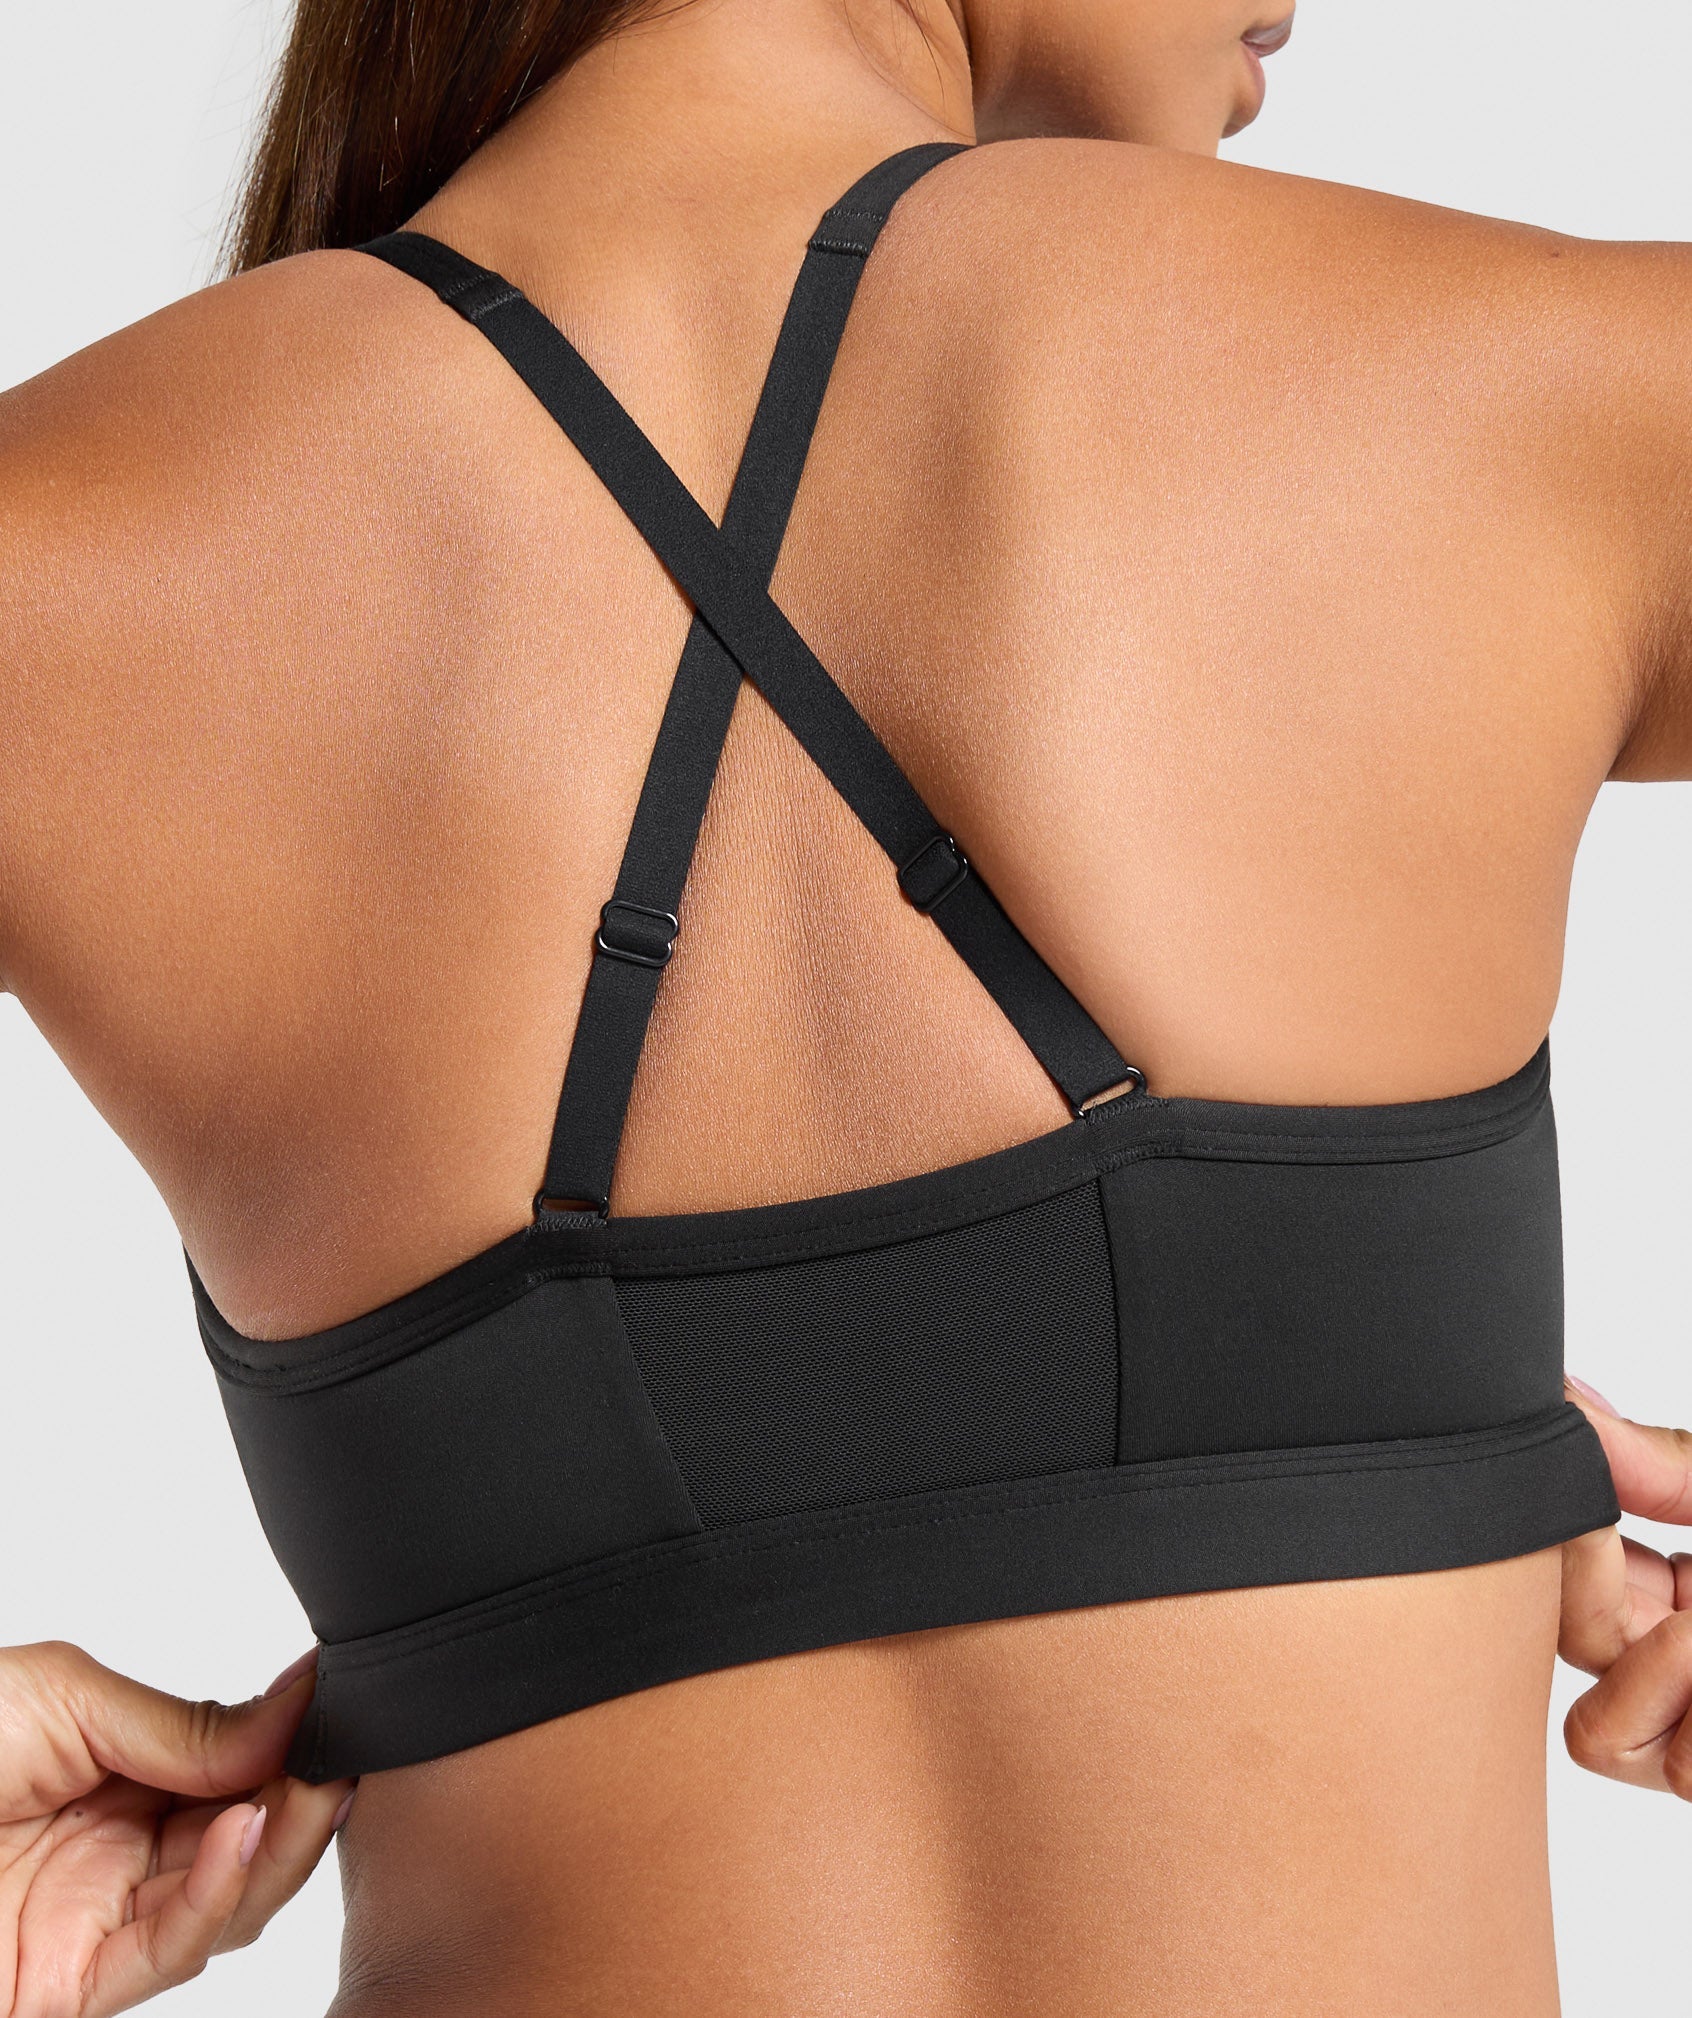 Ruched Sports Bra in Black - view 7